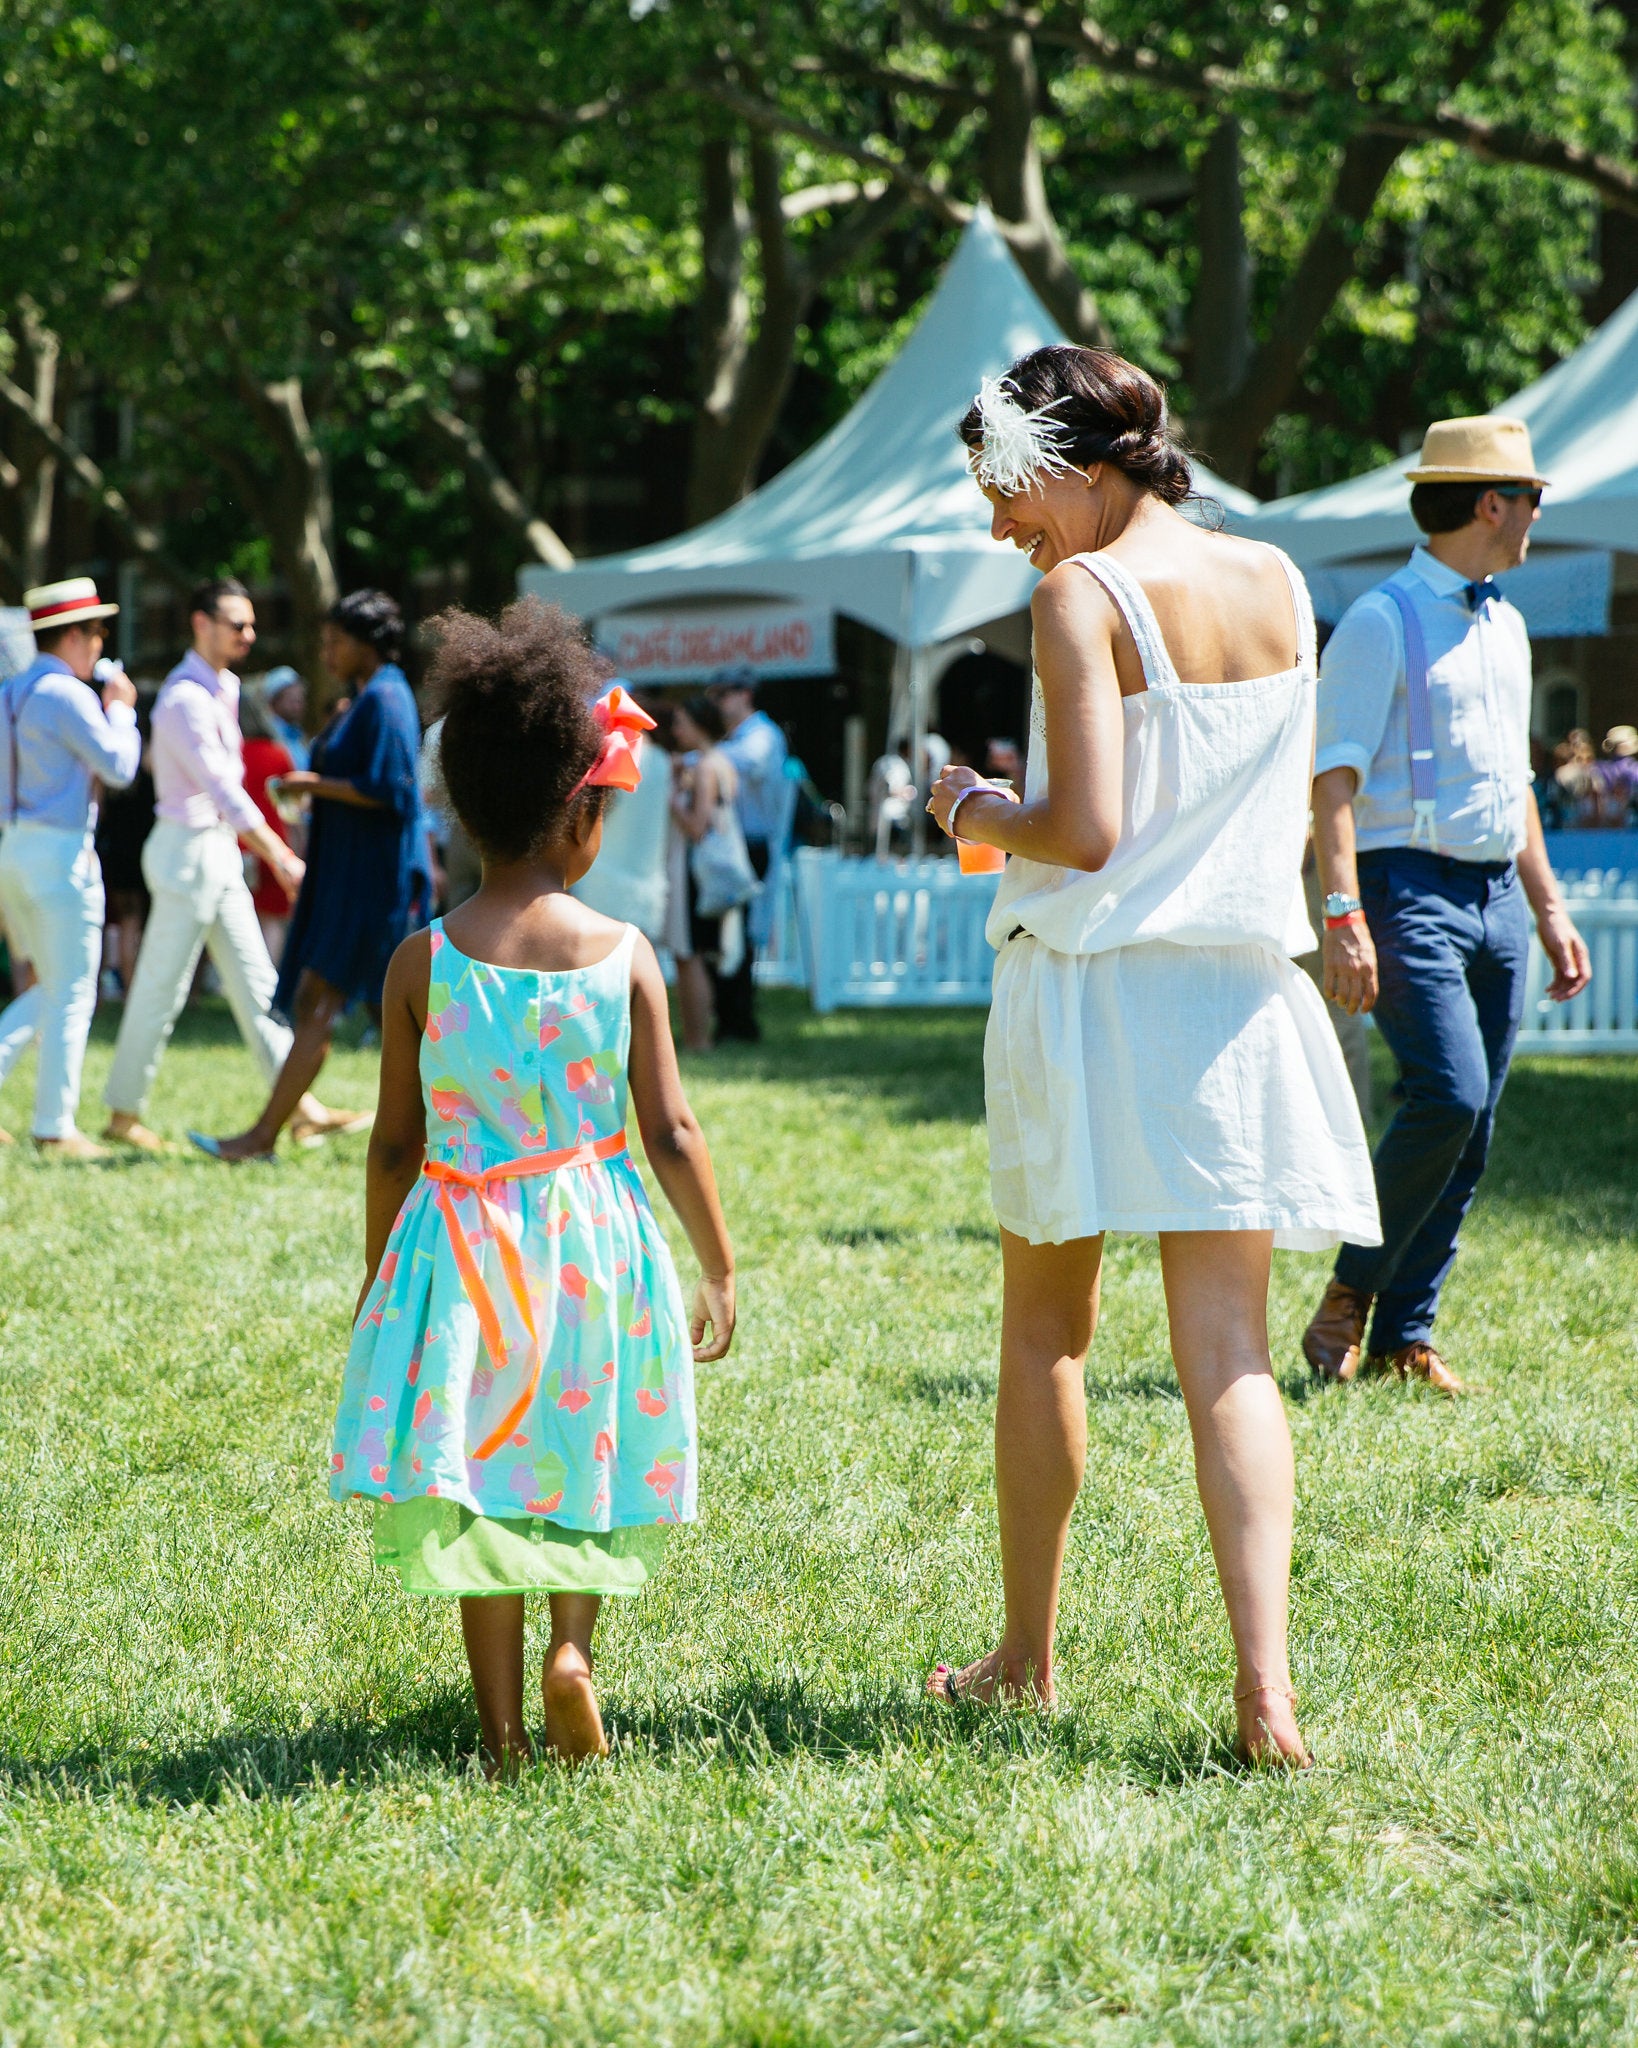 Go Back to the Roaring '20s With These Fabulous Looks From the 12th Annual Jazz Age Lawn Party
